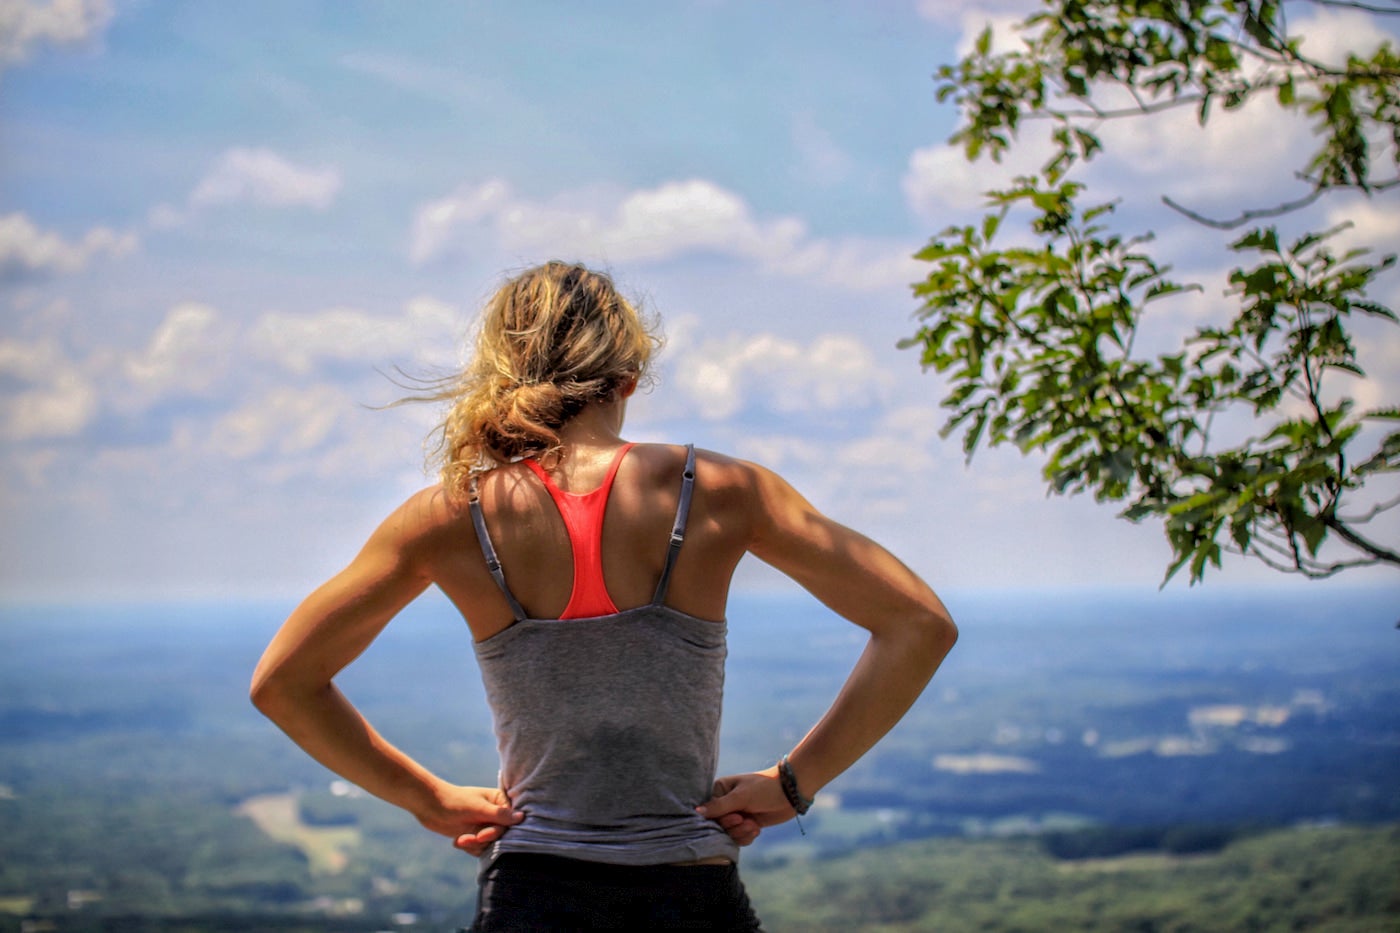 Woman catching her breathe at the top of a hill after running.